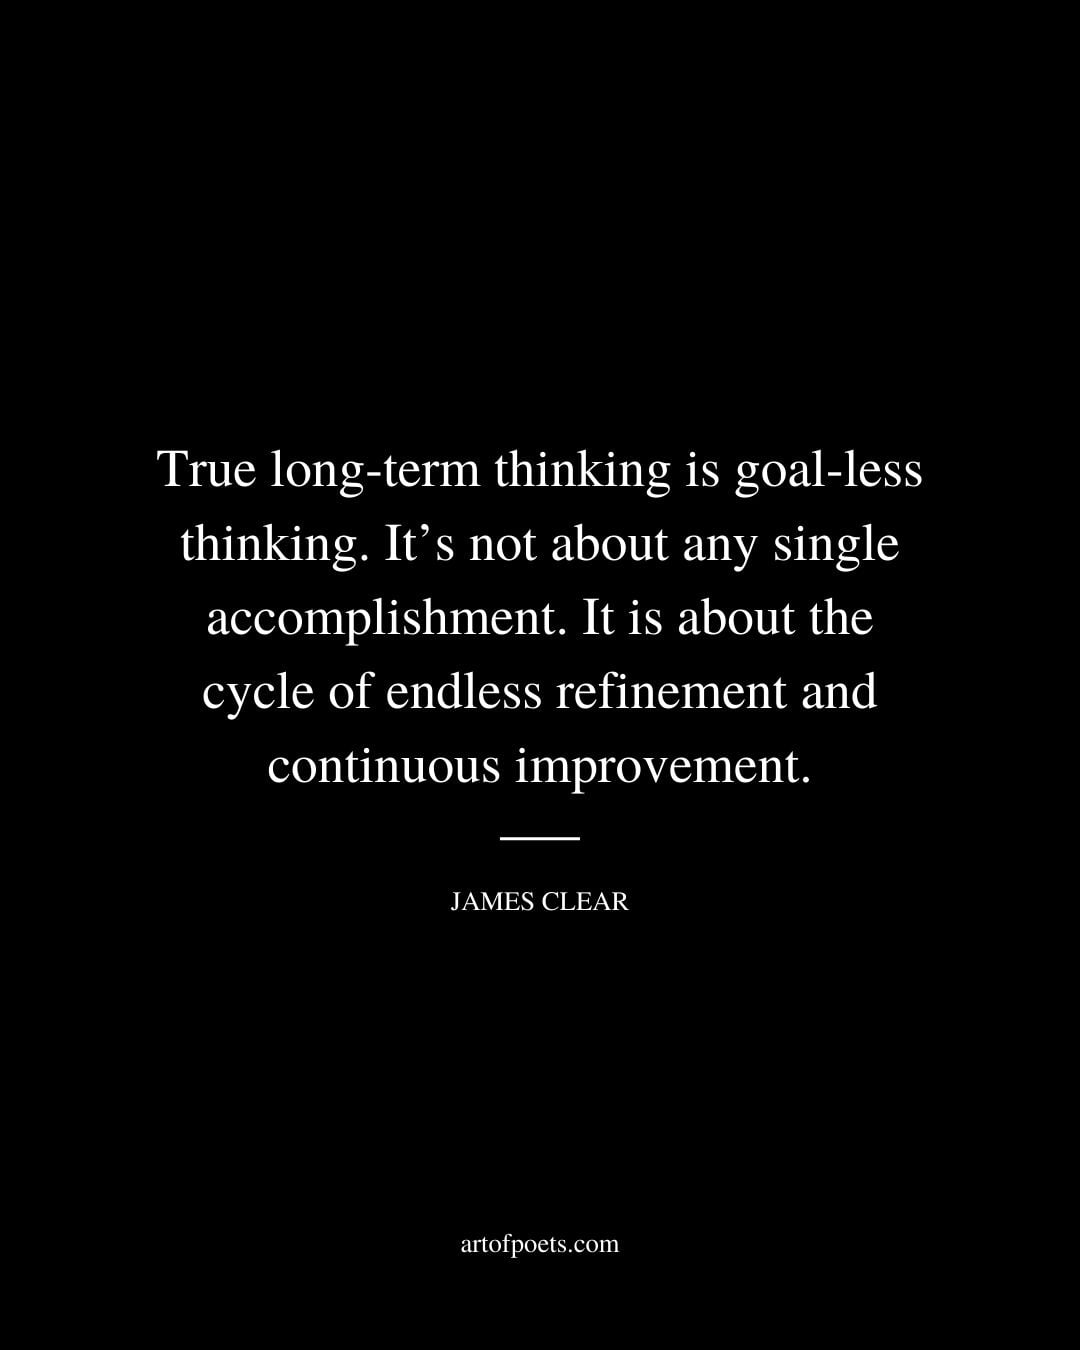 True long term thinking is goal less thinking. Its not about any single accomplishment. It is about the cycle of endless refinement and continuous improvement